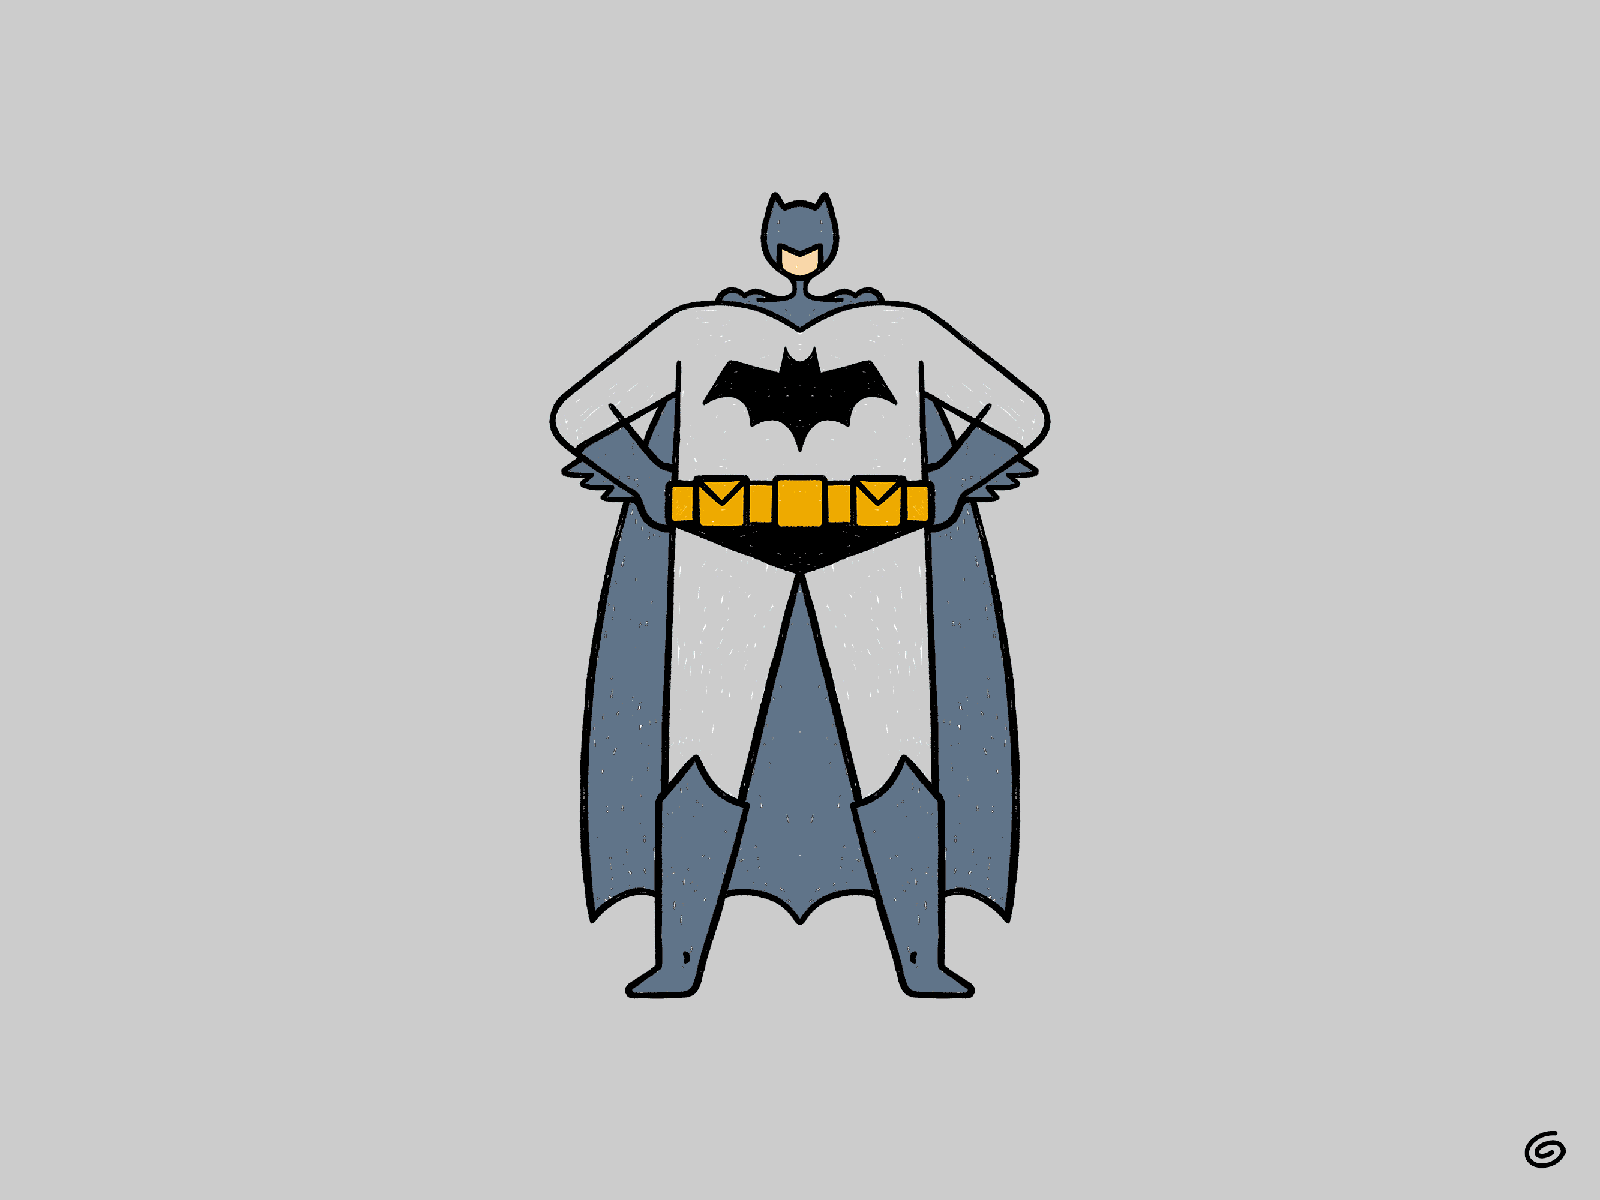 Iconic cartoon character drawing hero iconic illustration popculture pose template